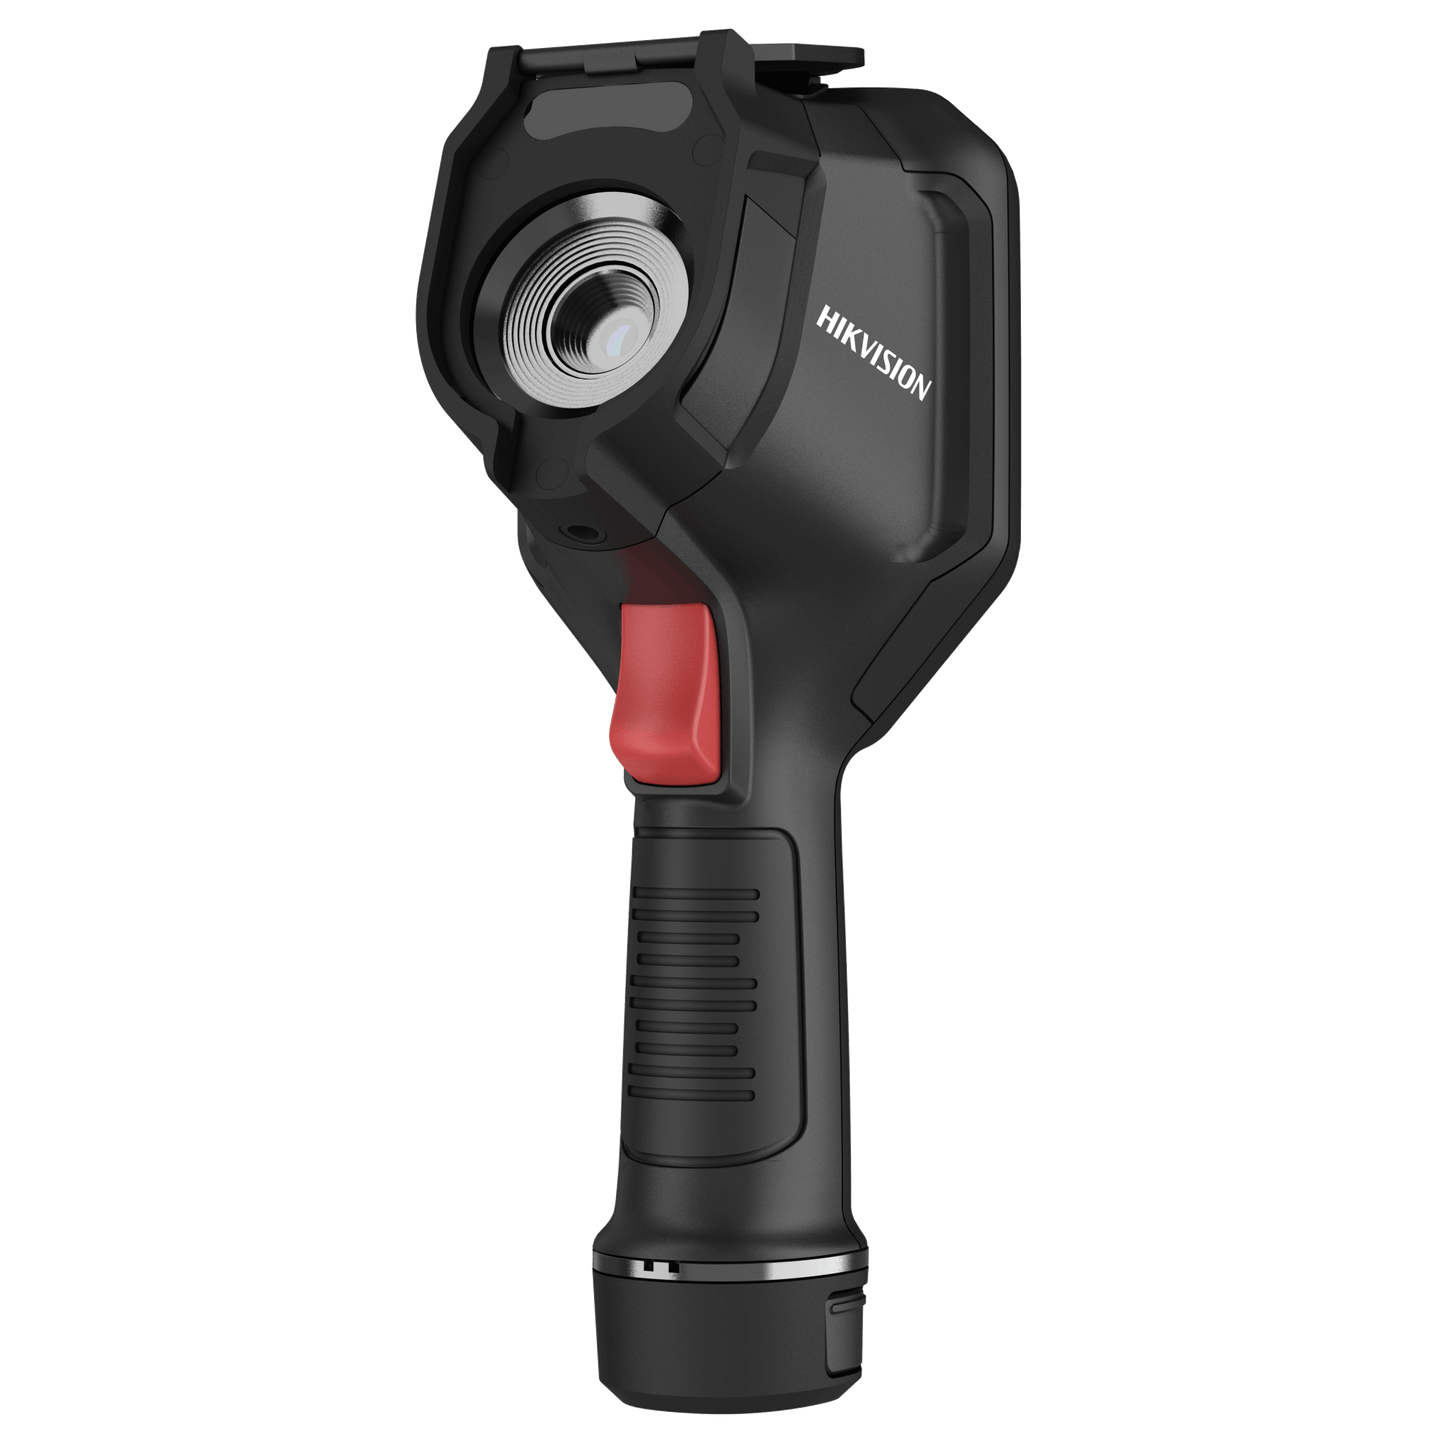 HikMicro M20W Handheld Thermography Camera on a transparent background - Front Lens View